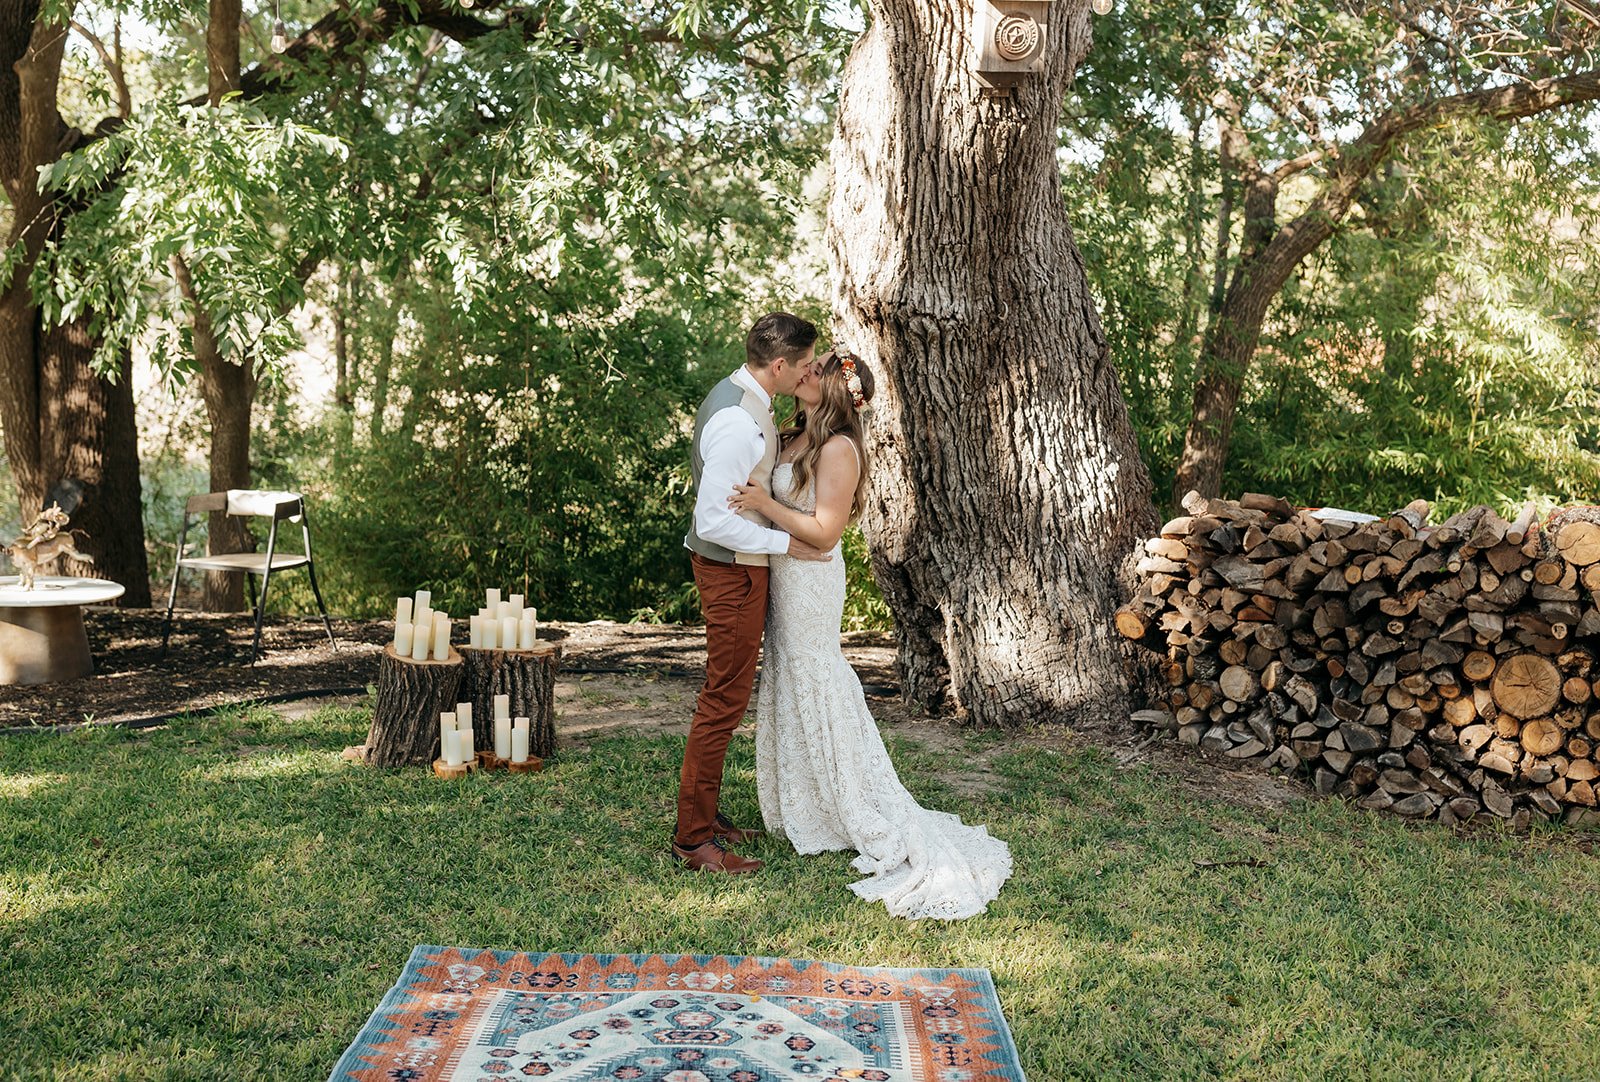 Leah and James share their first kiss as husband and wife under the trees